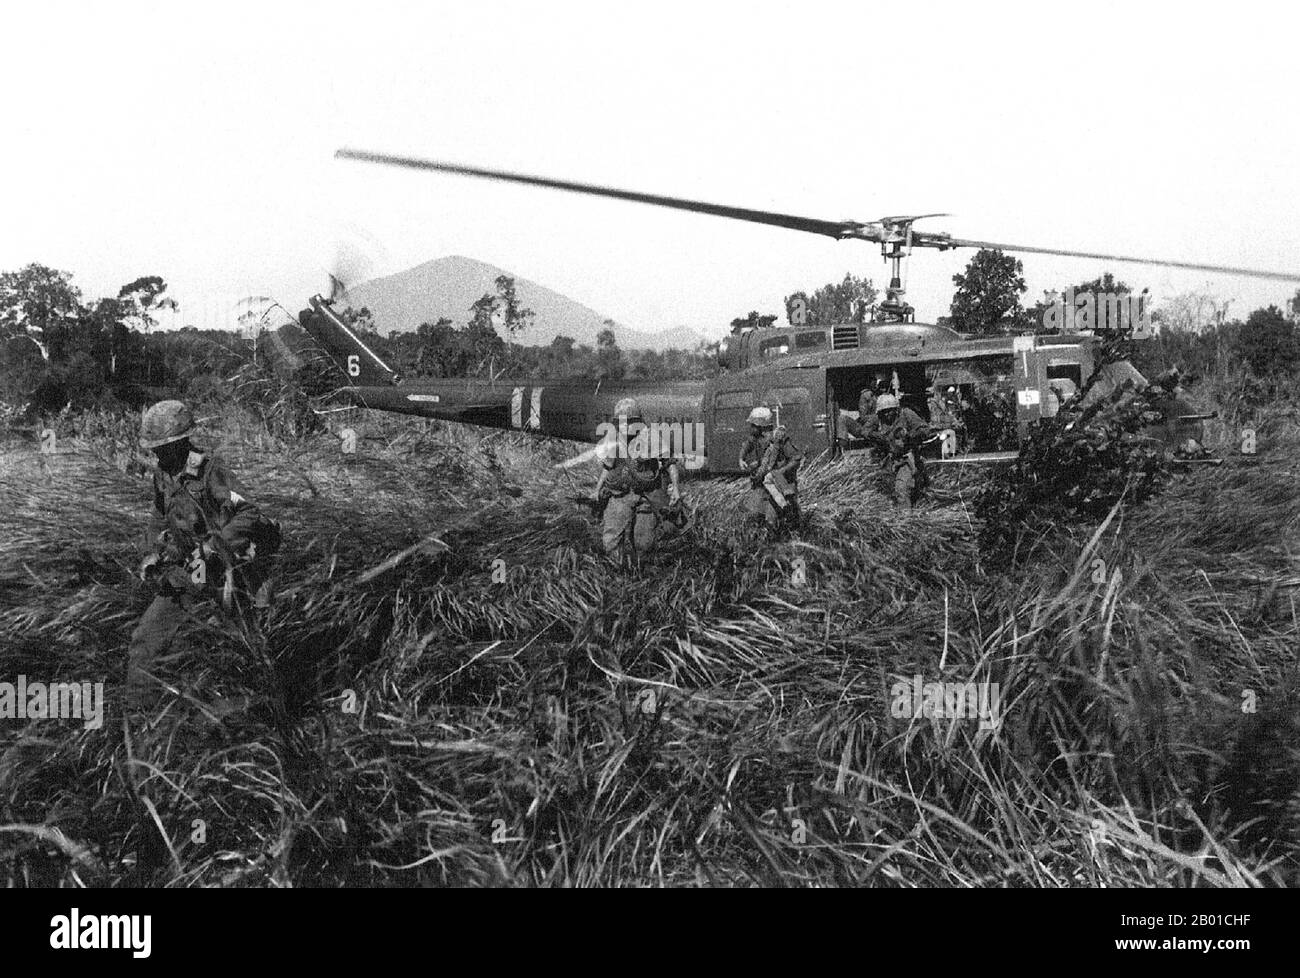 Vietnam: US infantry attacking from a Huey UH-1D helicopter during Operation Attleboro, Central Highlands, 1966.  The Second Indochina War, known in America as the Vietnam War, was a Cold War era military conflict that occurred in Vietnam, Laos, and Cambodia from 1 November 1955 to the fall of Saigon on 30 April 1975. This war followed the First Indochina War and was fought between North Vietnam, supported by its communist allies, and the government of South Vietnam, supported by the U.S. and other anti-communist nations. Stock Photo